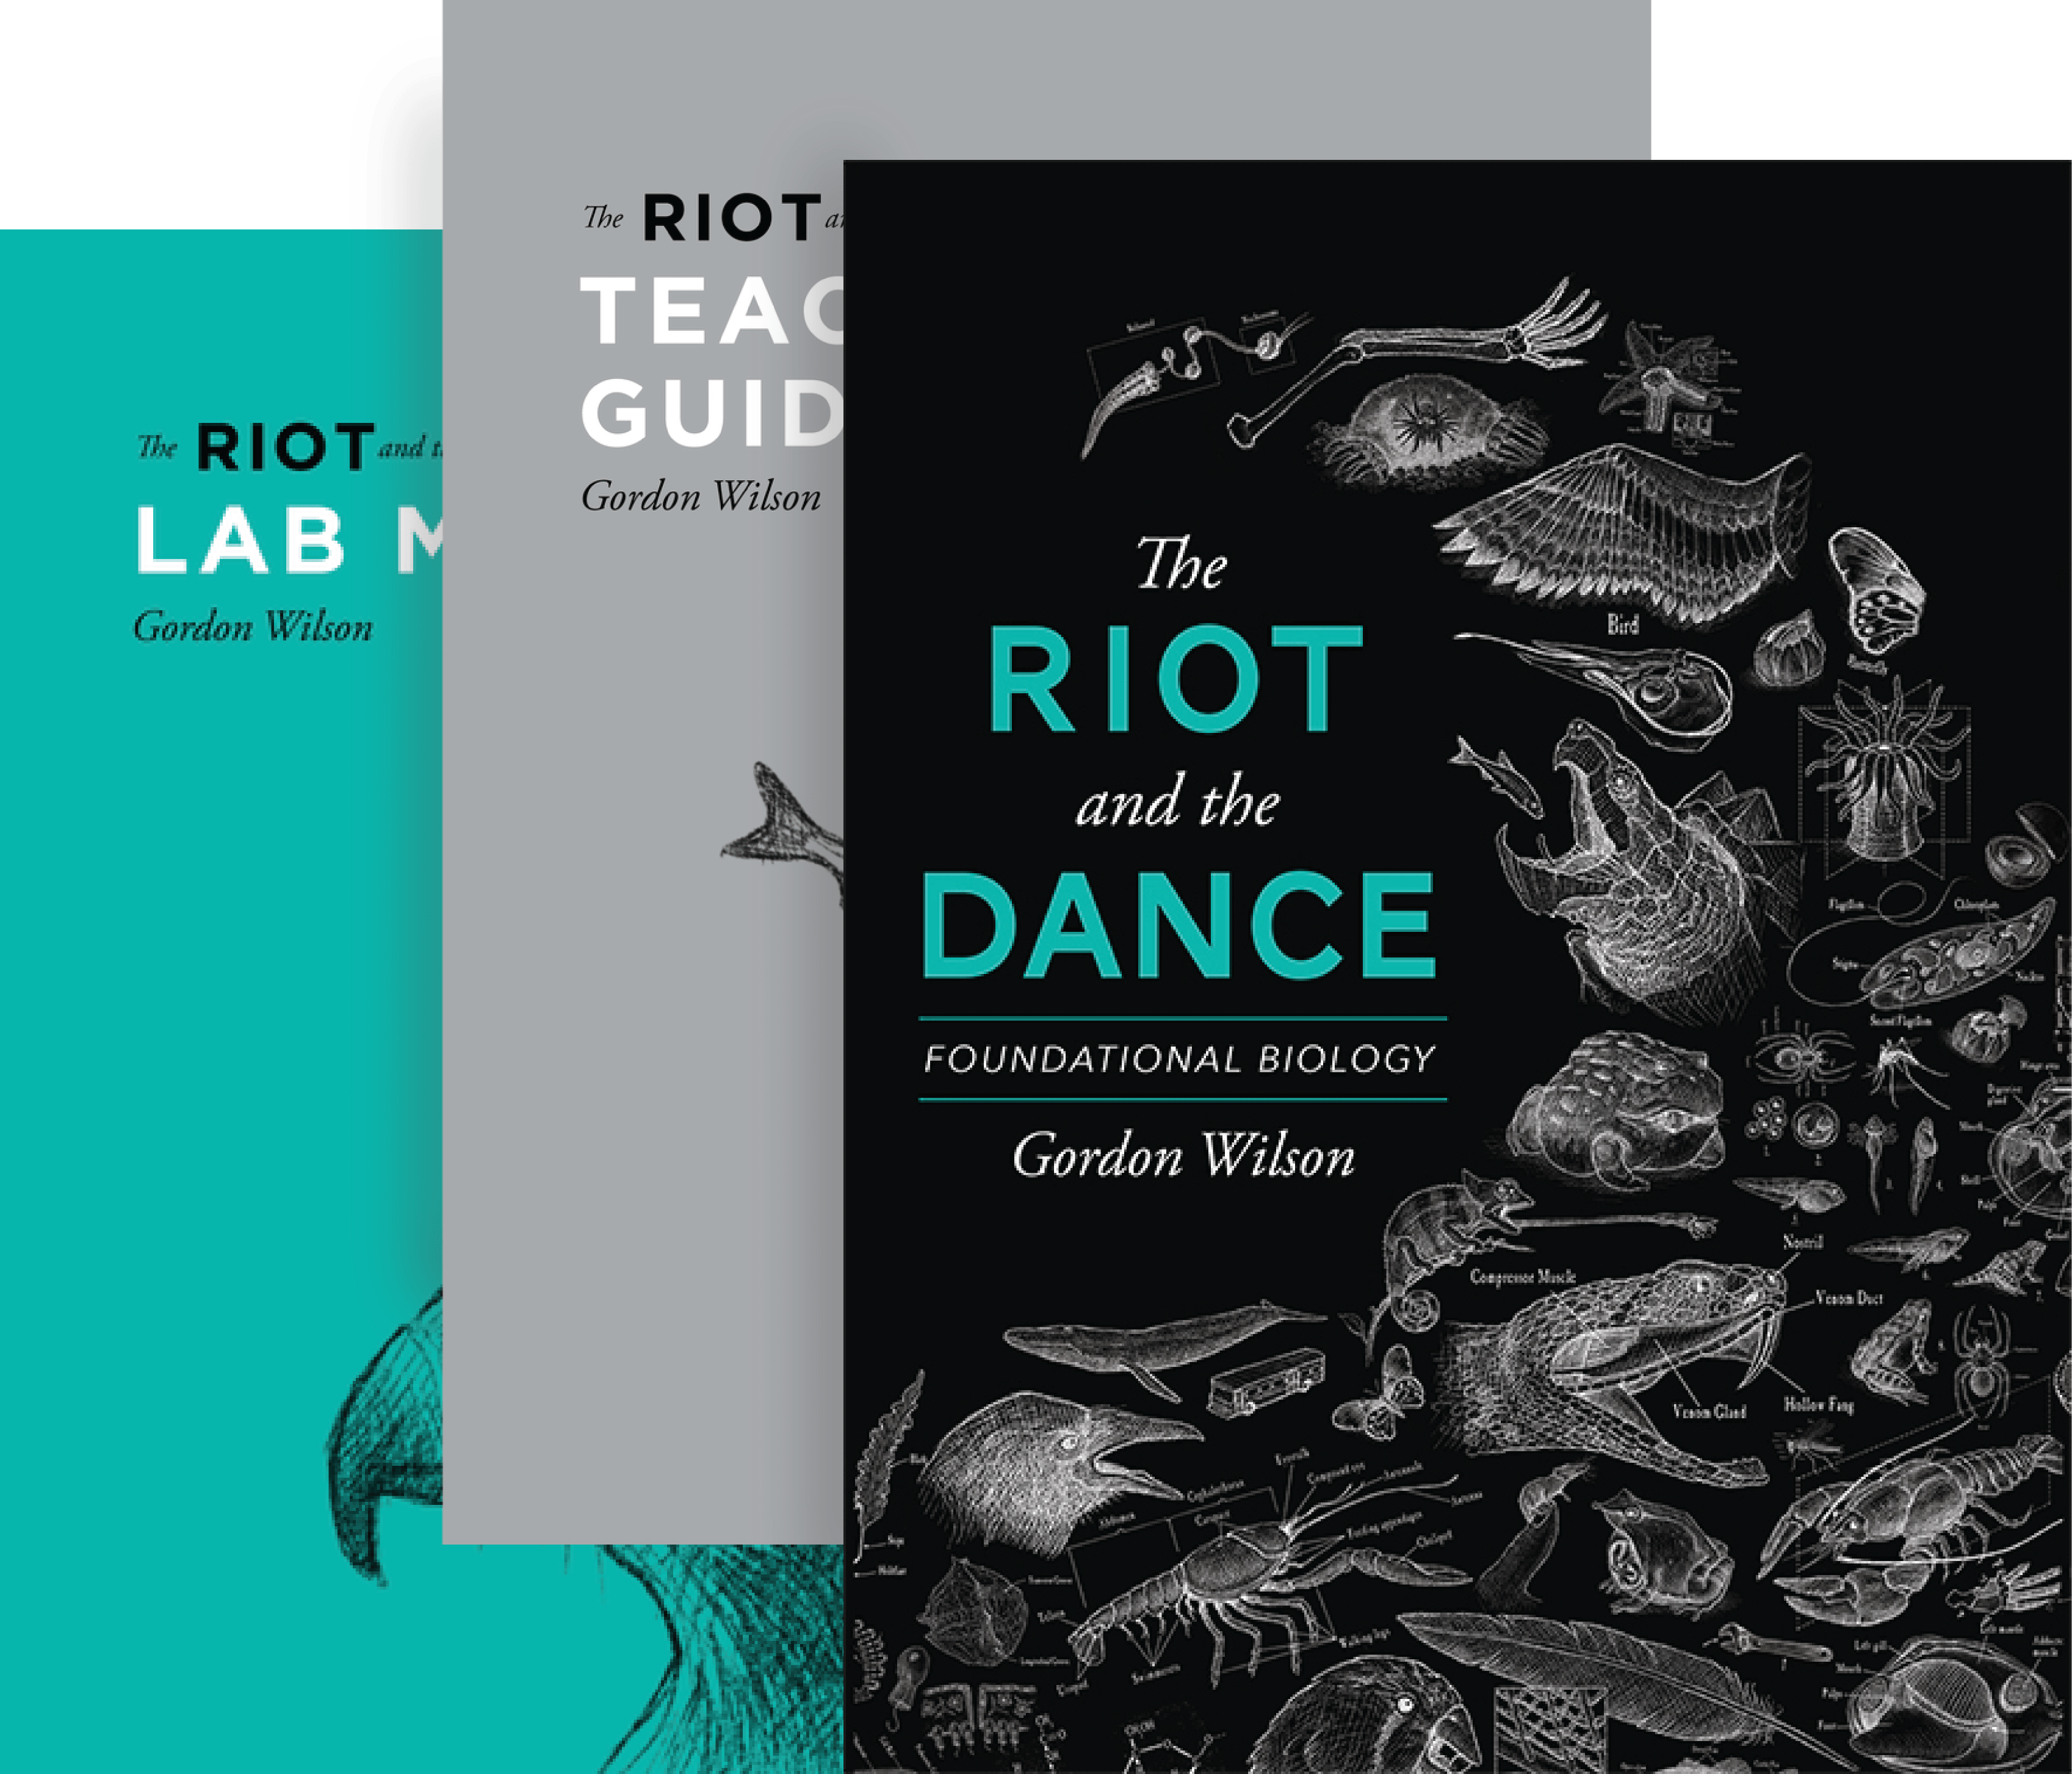 The Riot and the Dance: Foundational Biology, The Riot and the Dance Teacher's Guide, and The Riot and the Dance Lab Manual, all by Dr. Gordon Wilson